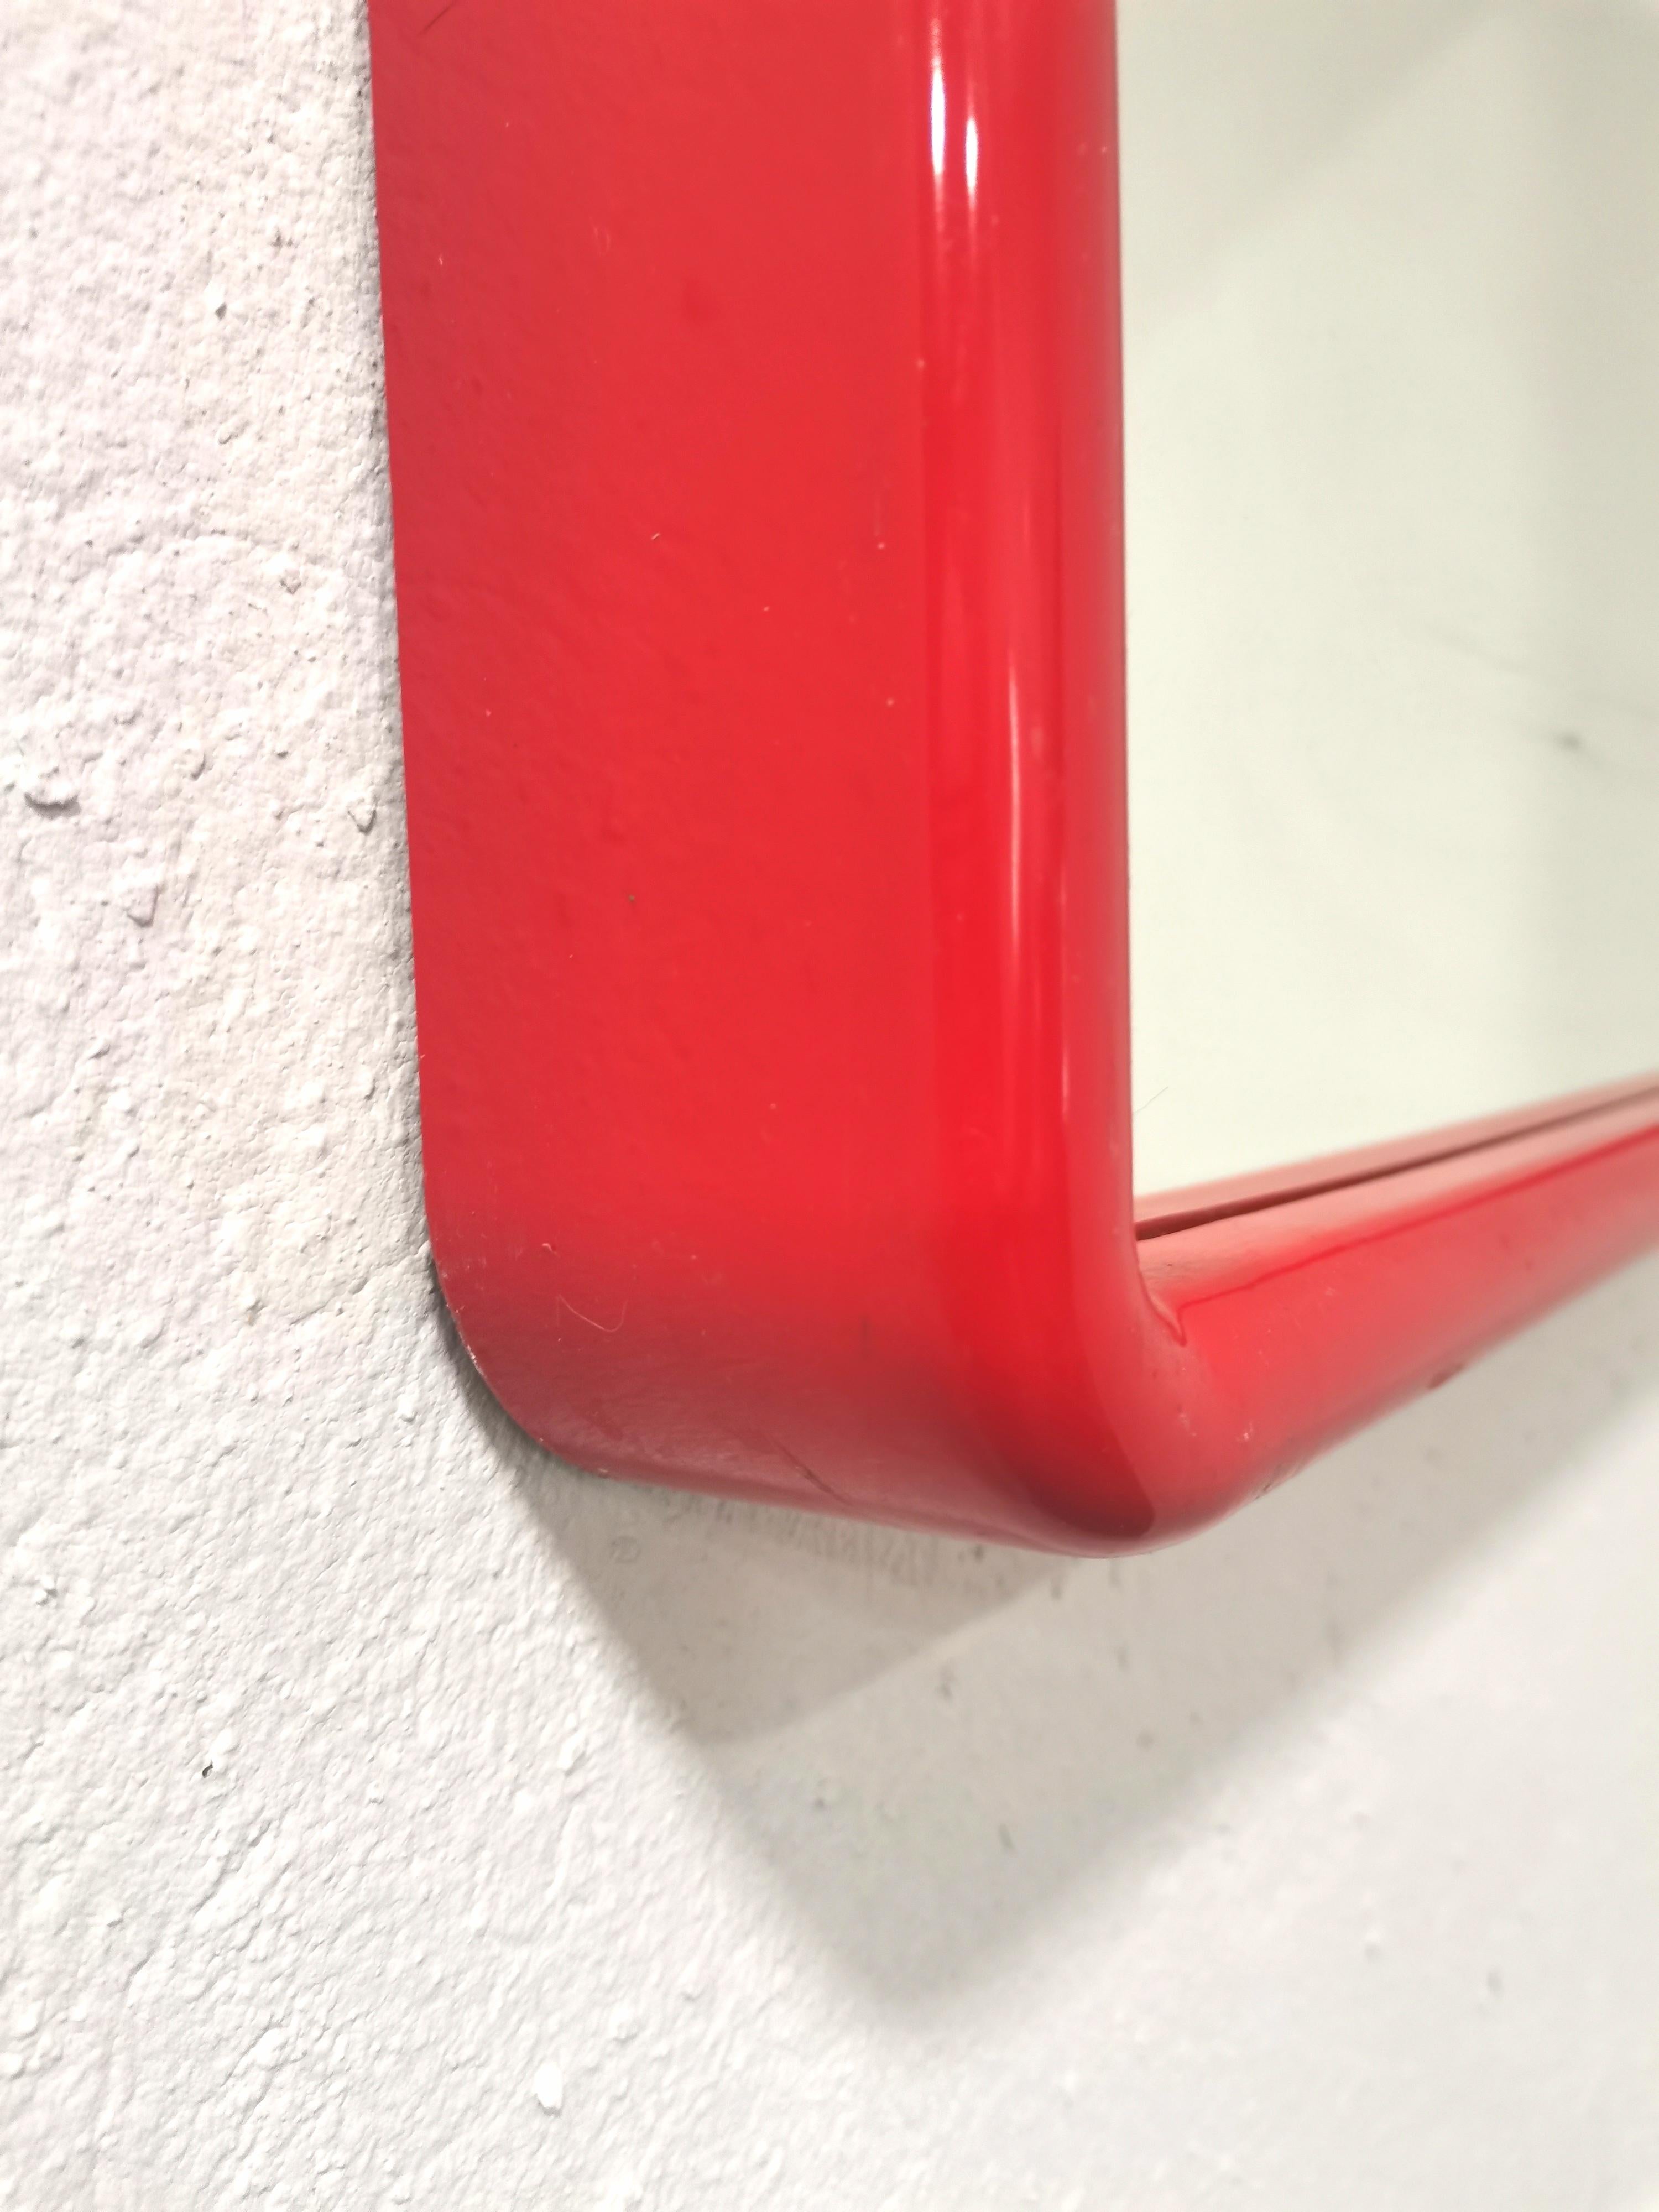 Vintage Italian Mirror. Made in 1970s. Simplicity of form and eternal design. This mirror will upgrade any room with its minimalistic aesthetic and vivid red colour. 
material: plastic, mirror
Condition:very good vintage condition with some traces